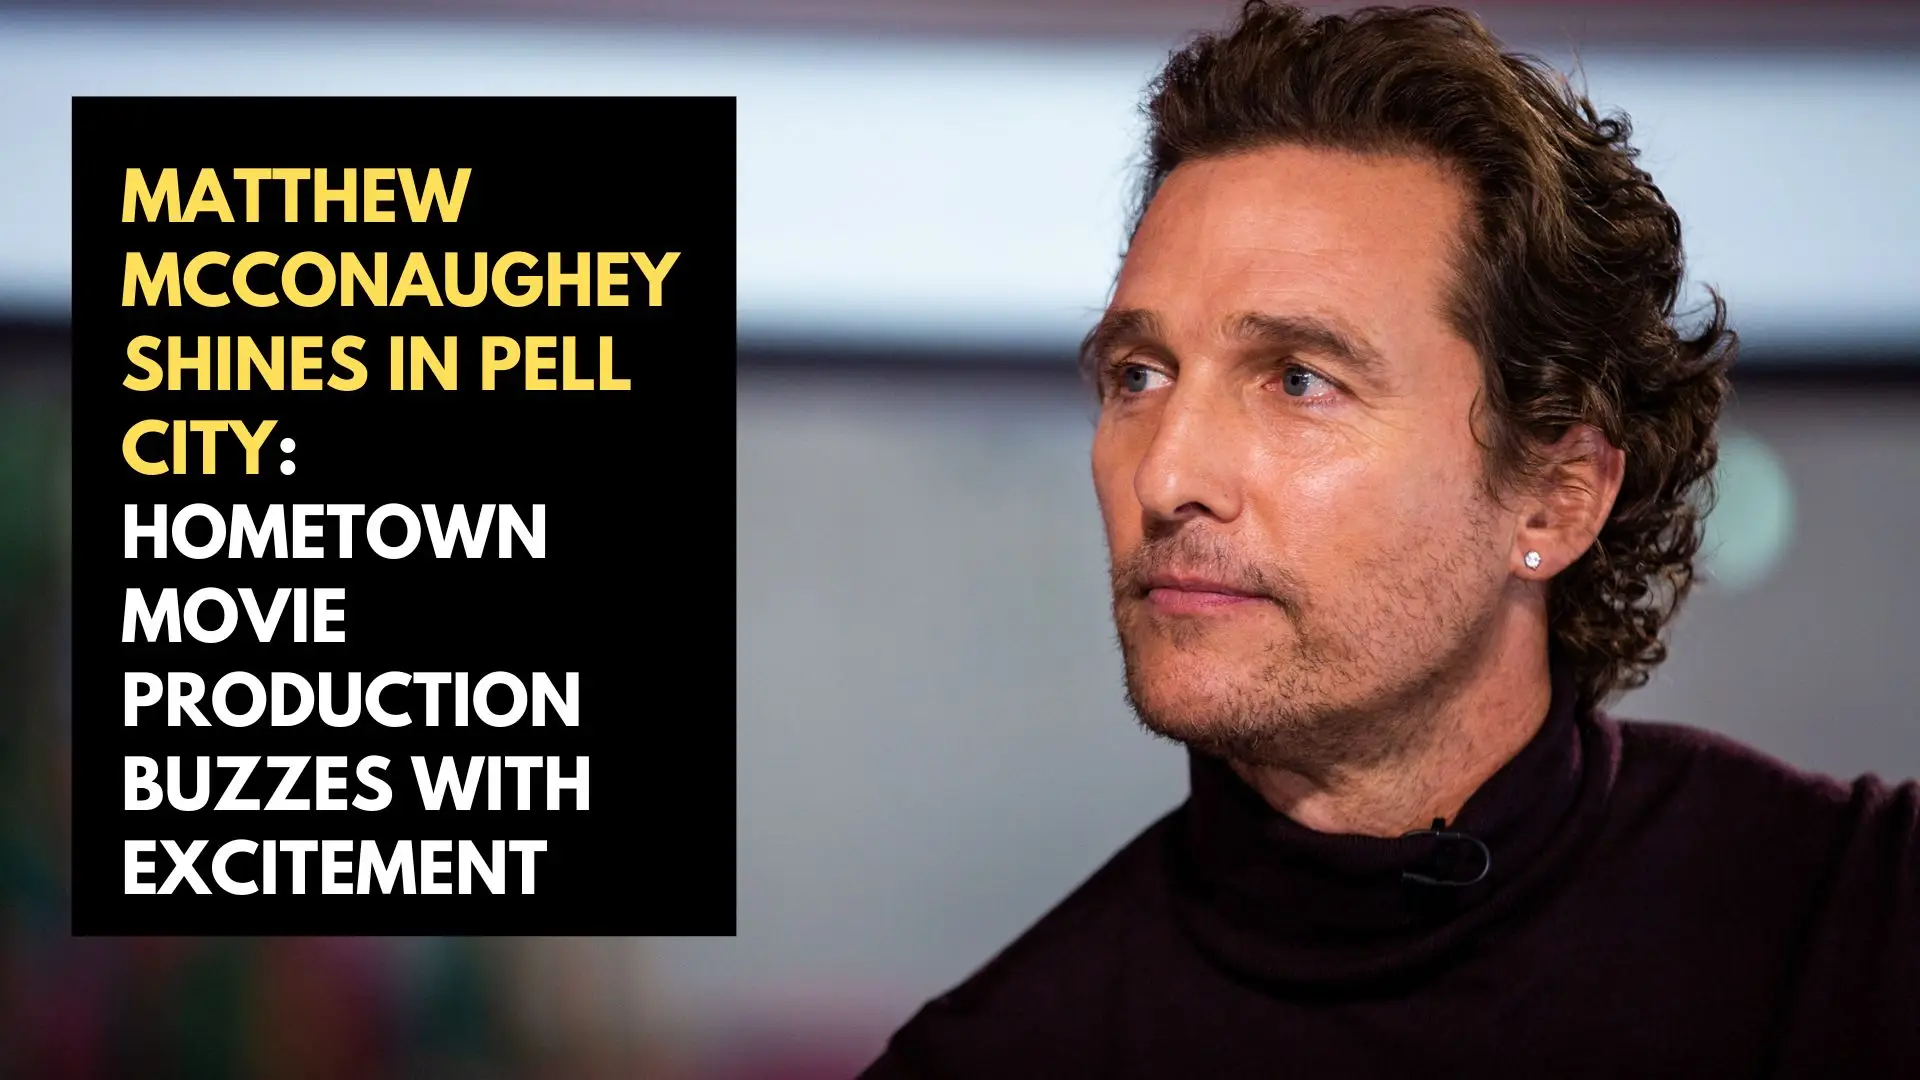 Matthew McConaughey Shines in Pell City: Hometown Movie Production Buzzes with Excitement